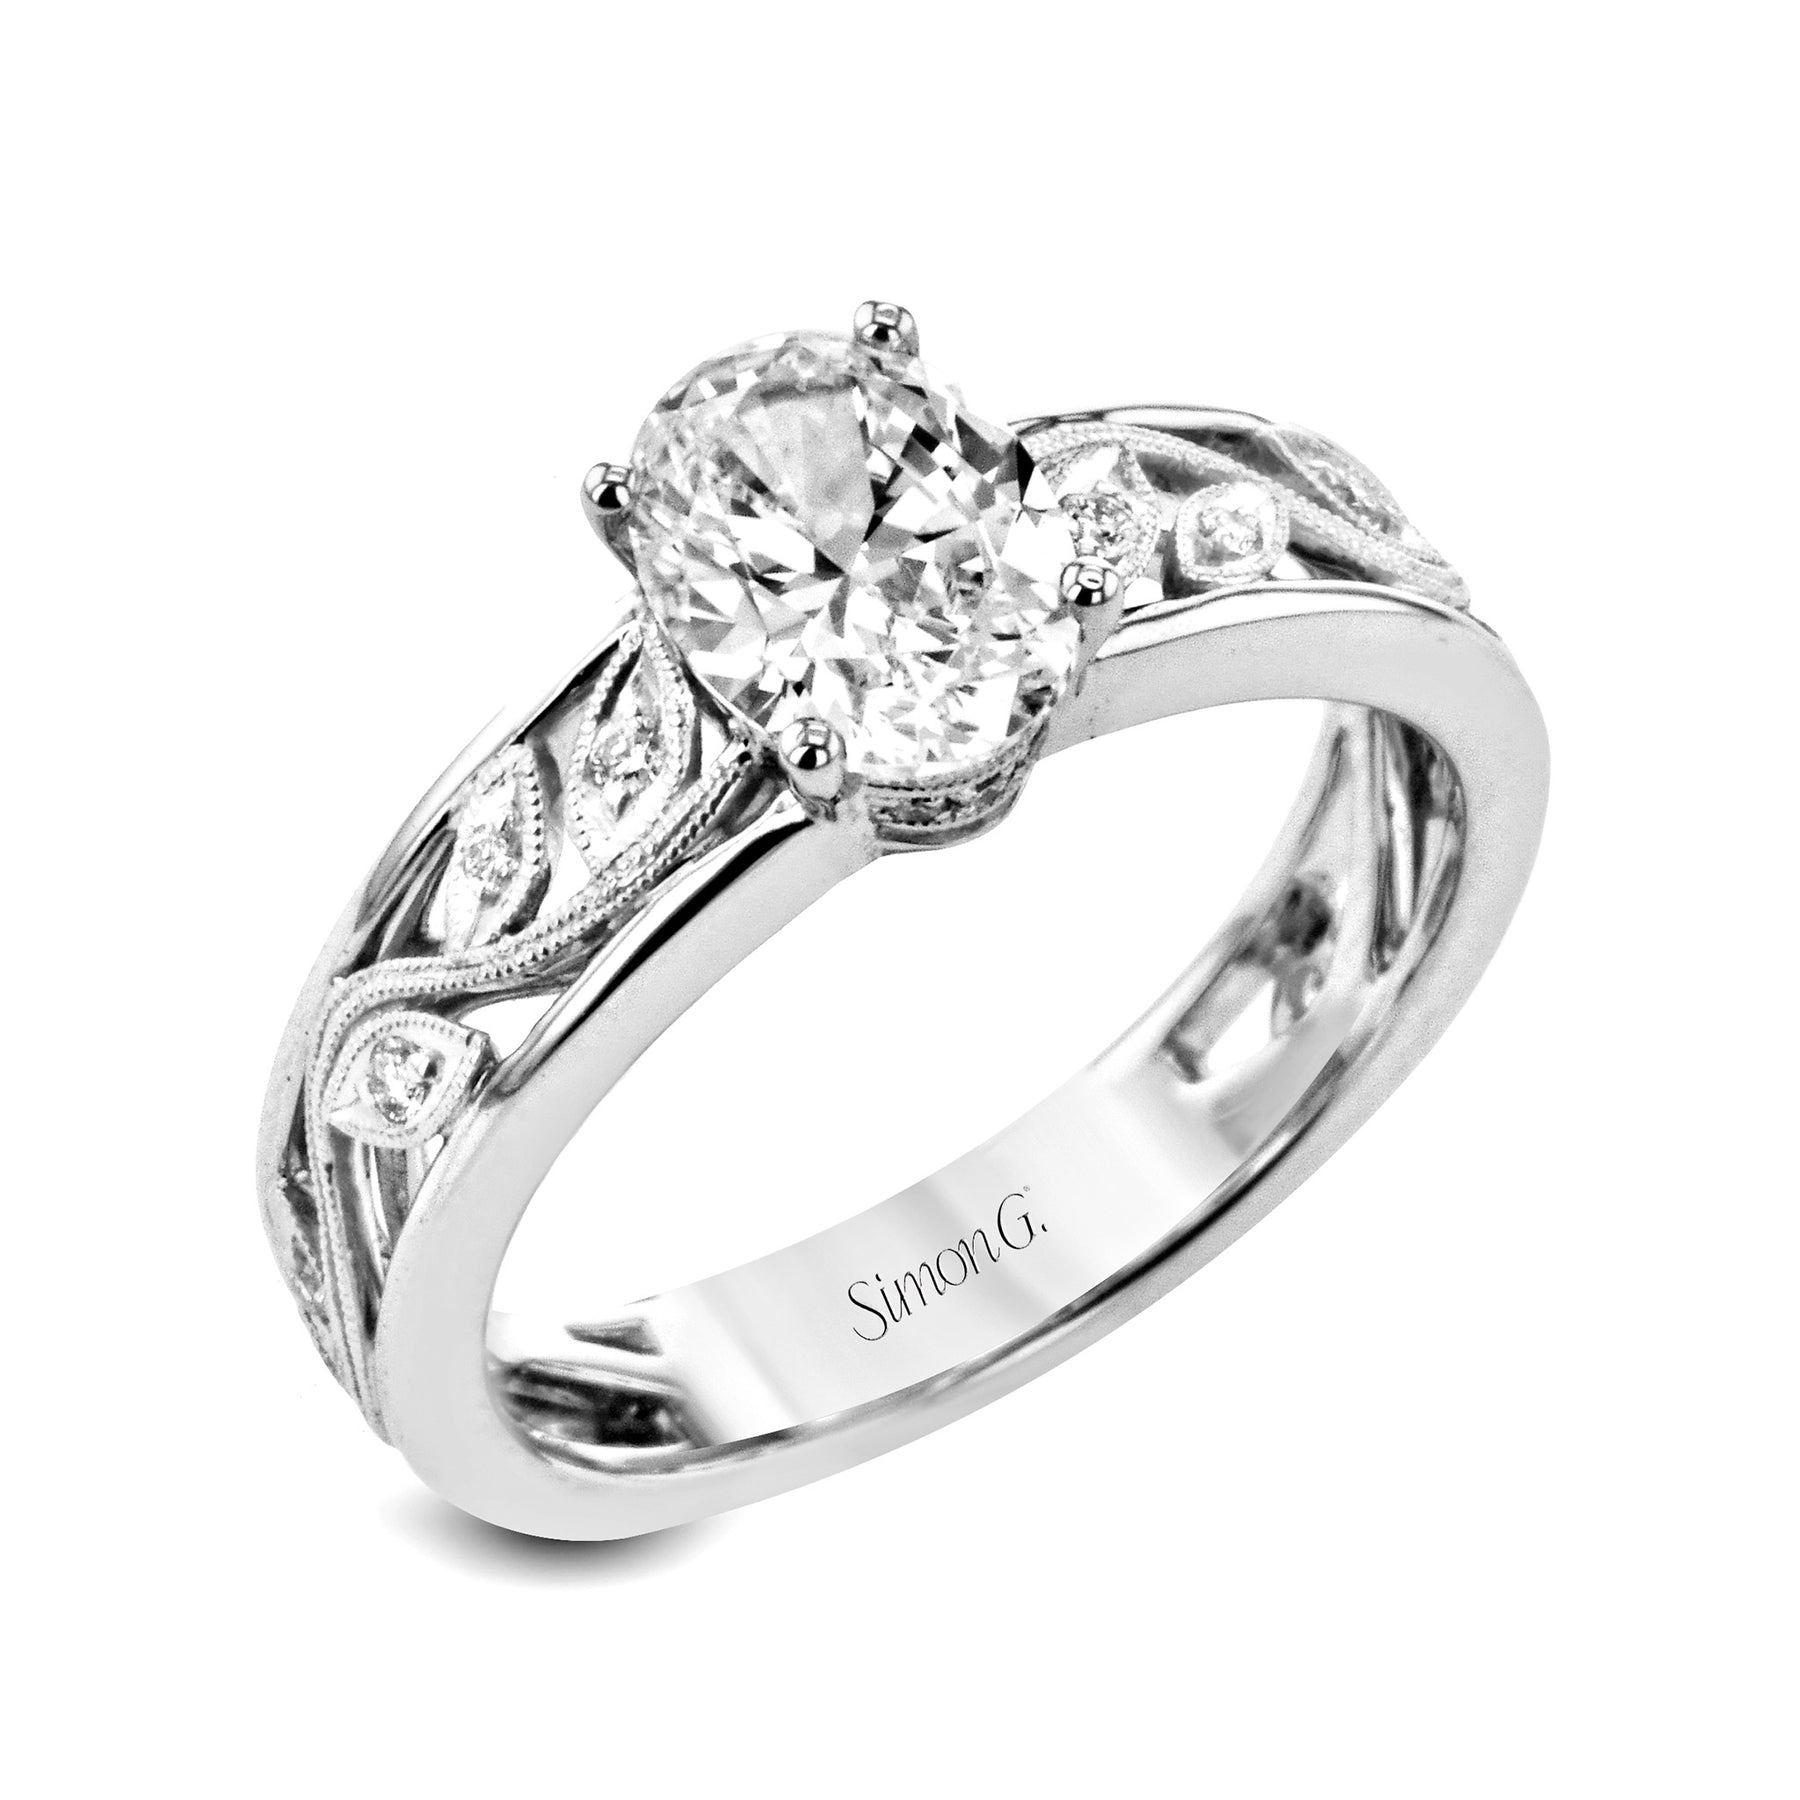 Oval-Cut Engagement Ring In 18k Gold With Diamonds MR2100-OV